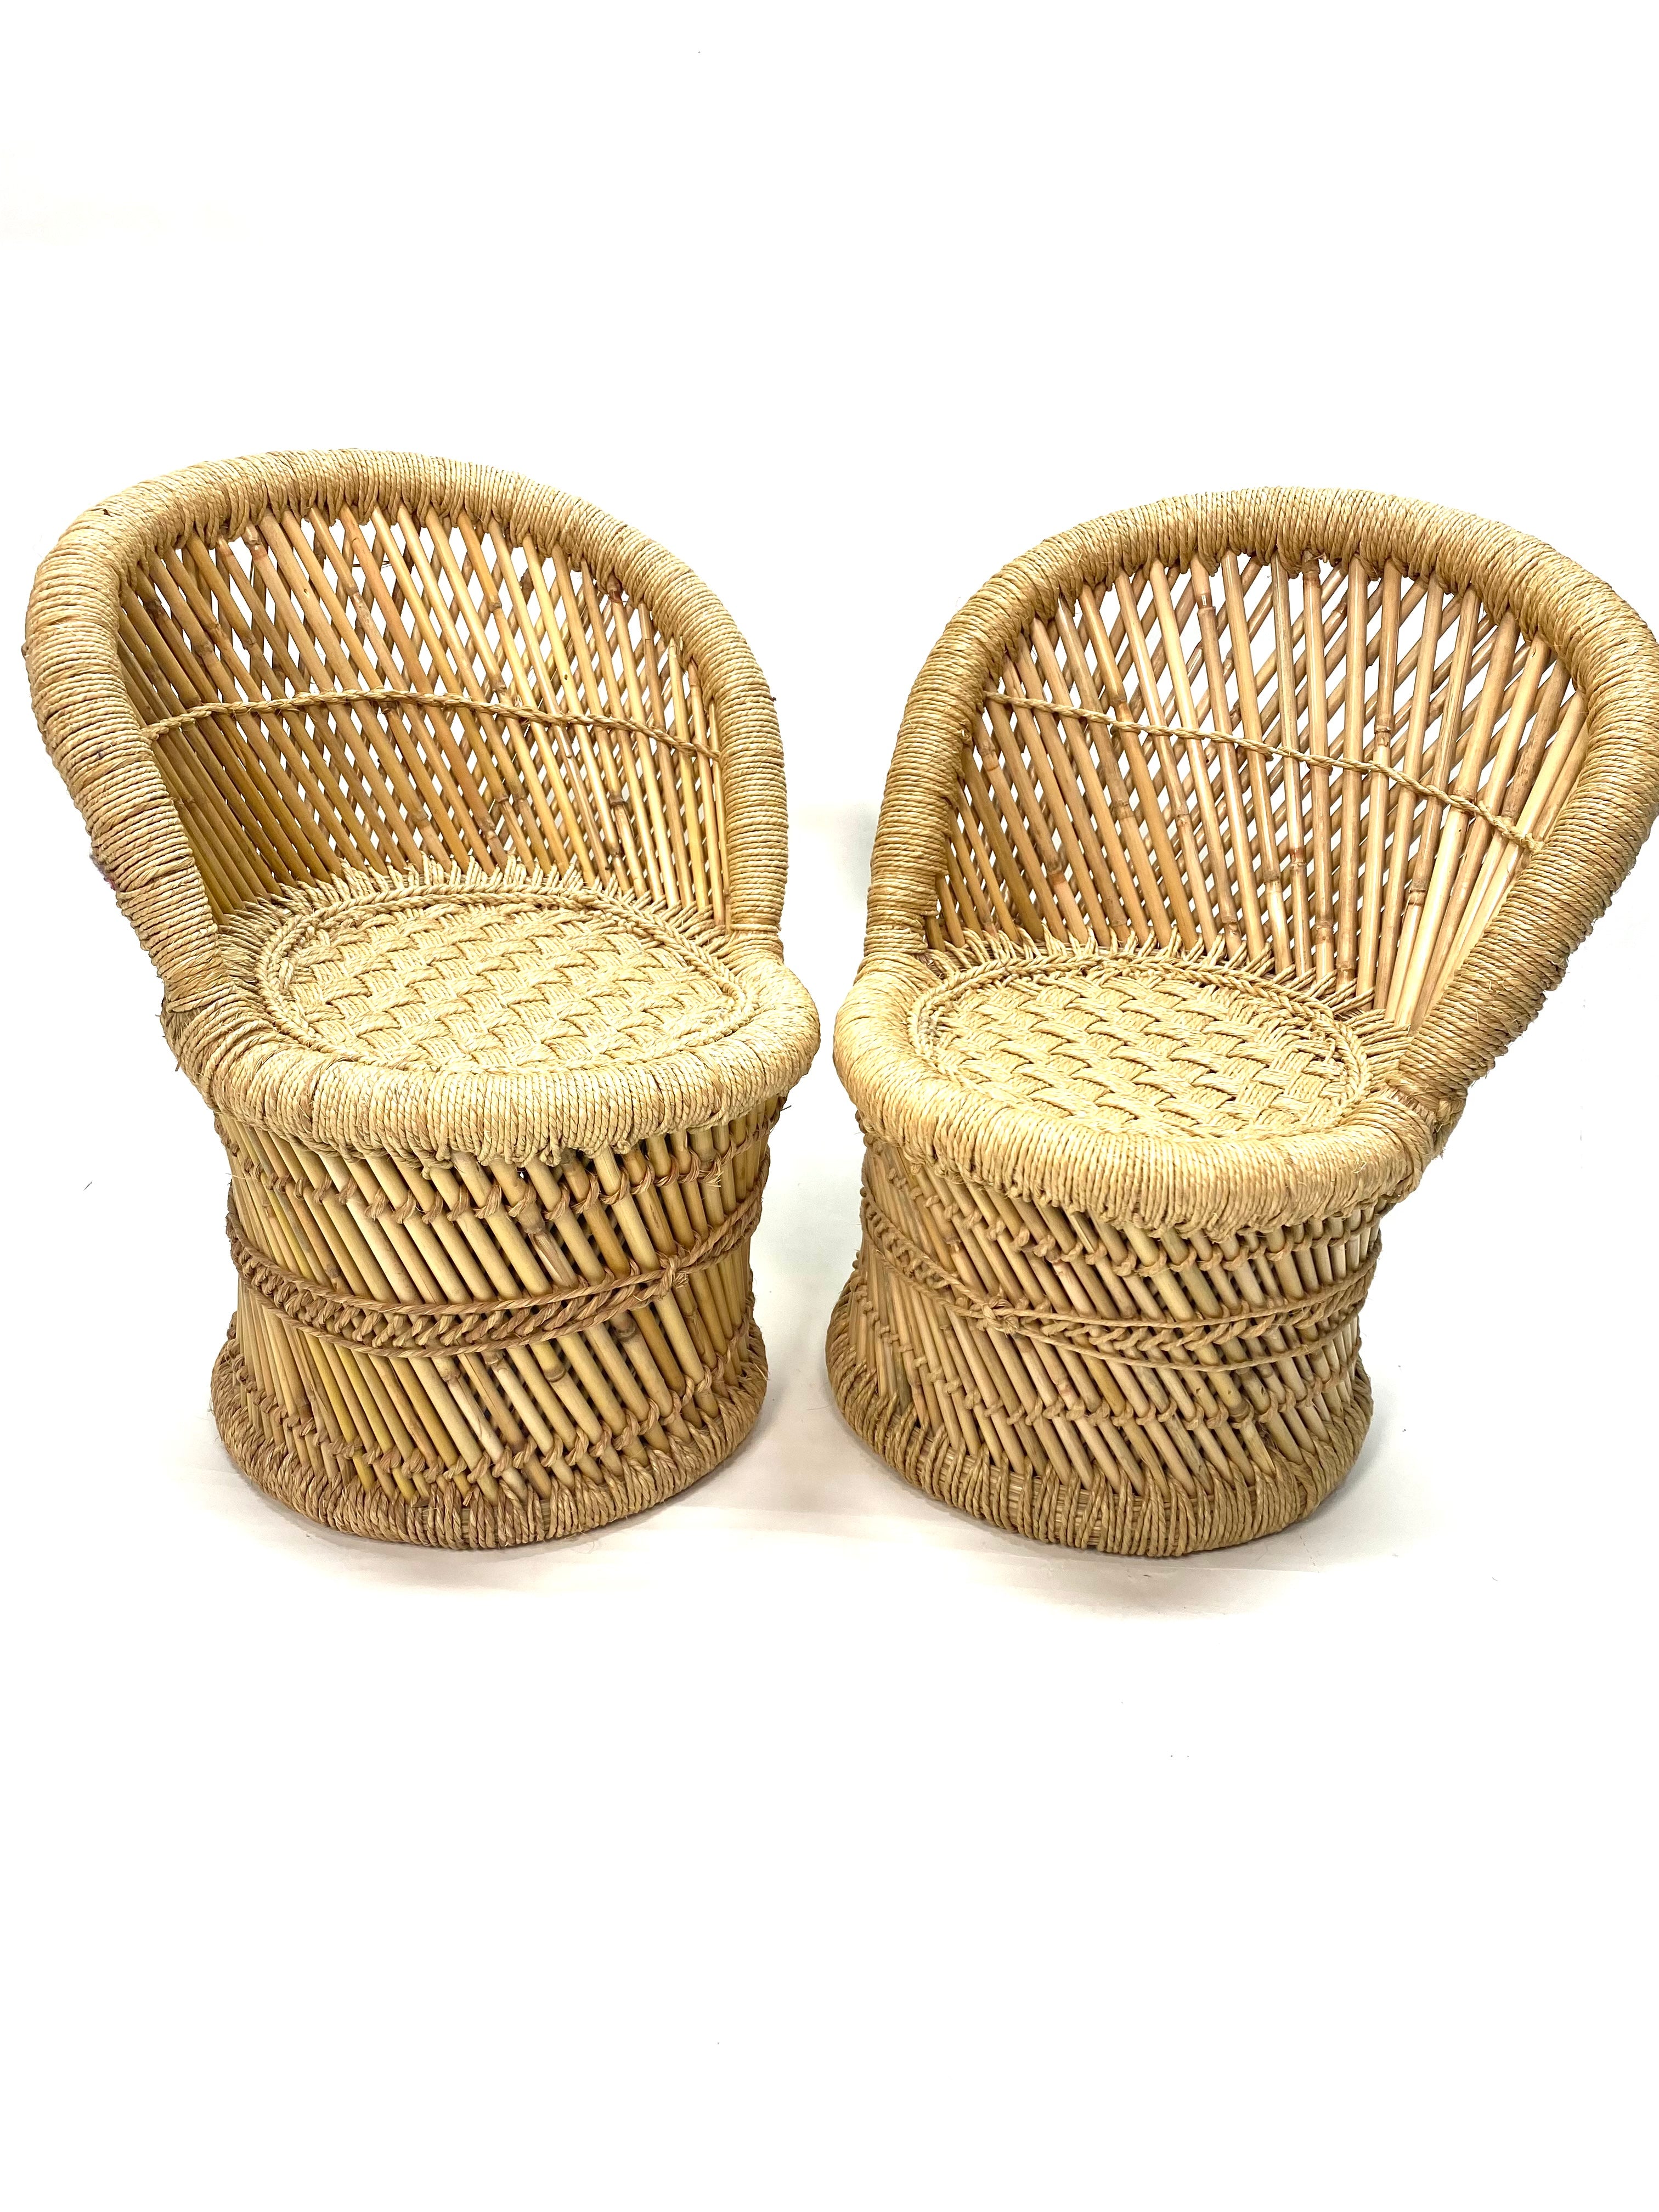 Pair of Children’s Cane Chairs